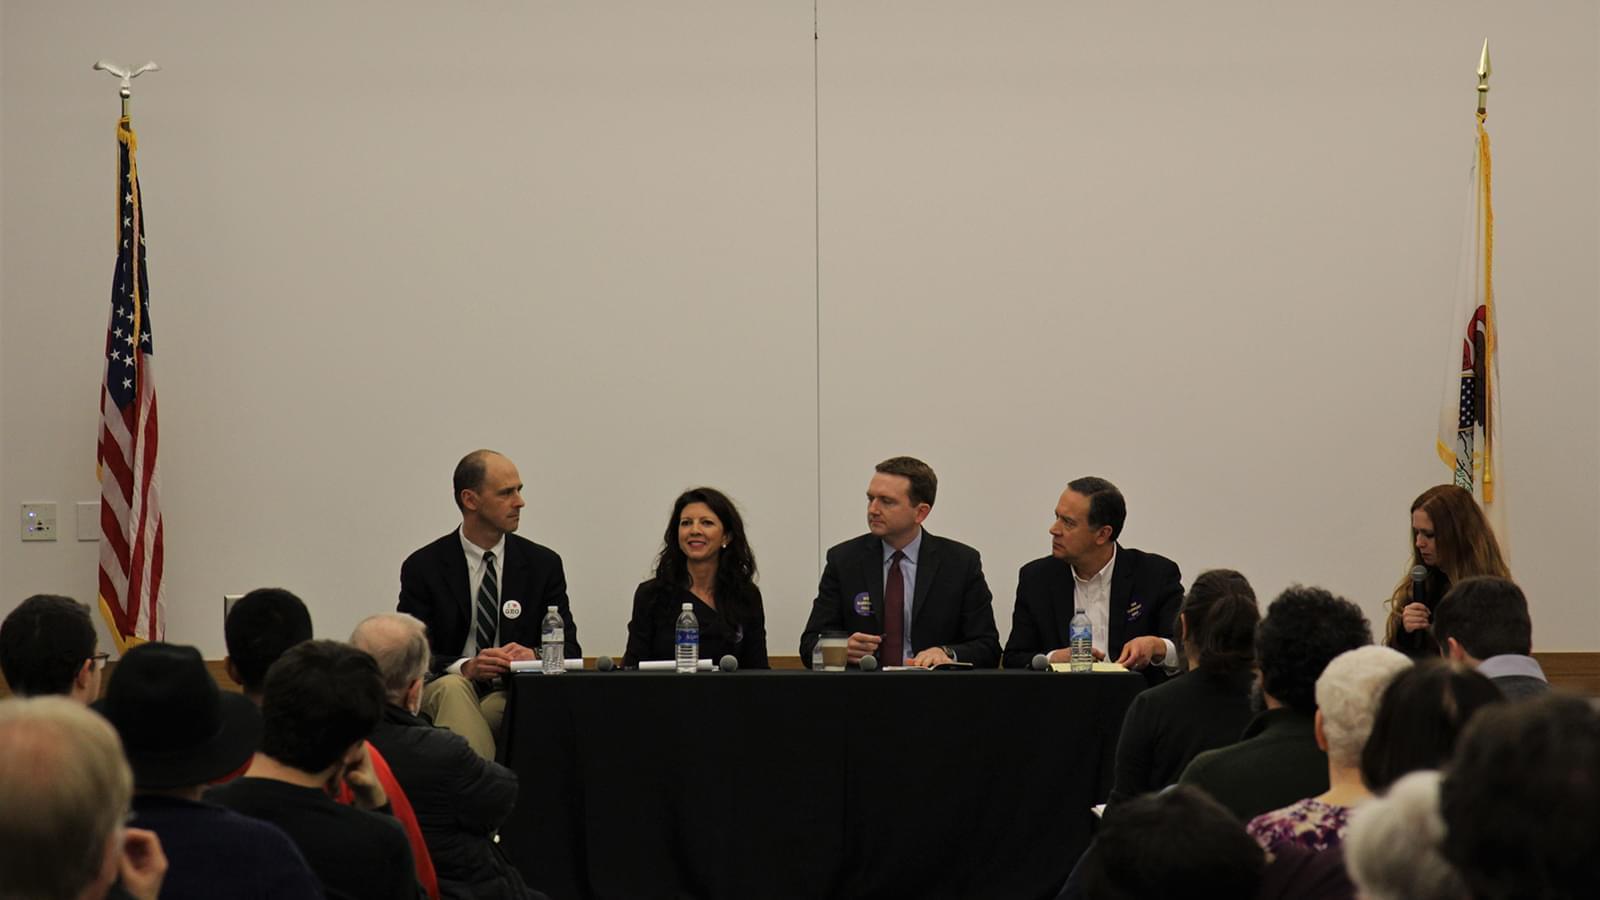 From left to right, candidates Jon Ebel, Betsy Dirksen Londigran, Erik Jones, and moderator Elizabeth Hess at a 13th Congressional District Democratic candidate forum on immigration on foreign policy.